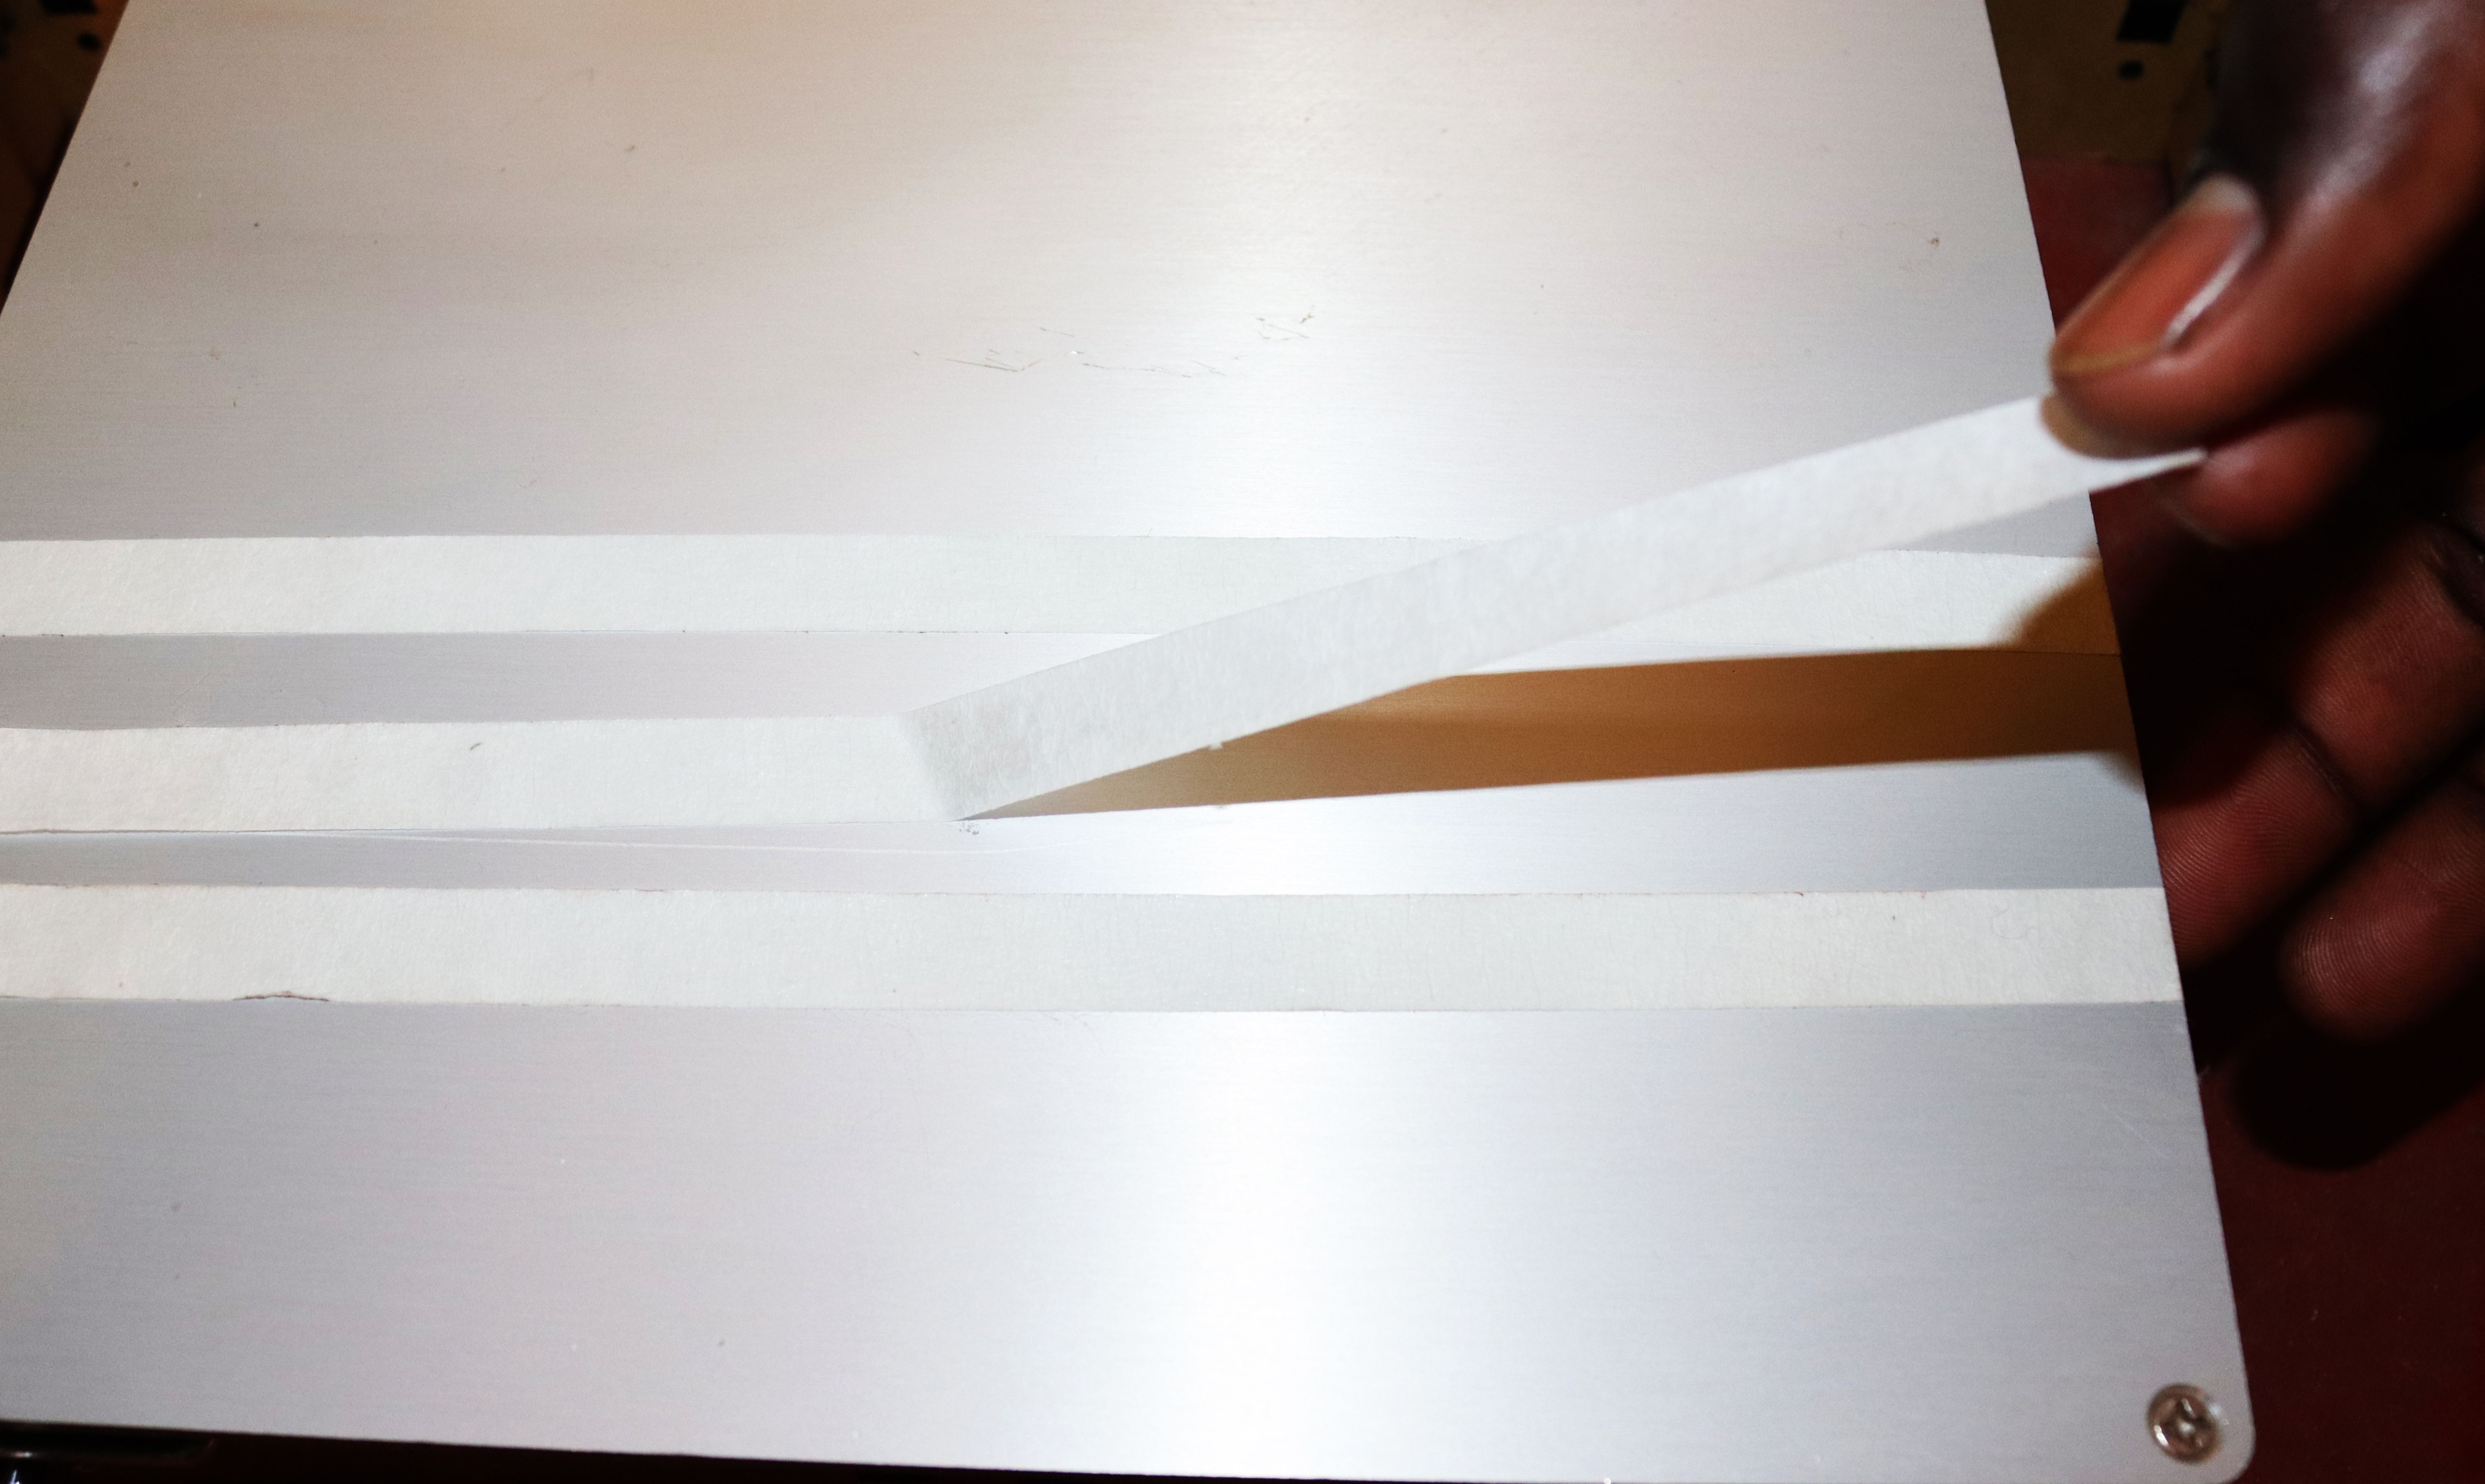 Using a masking tape to clean a 3D printer bed